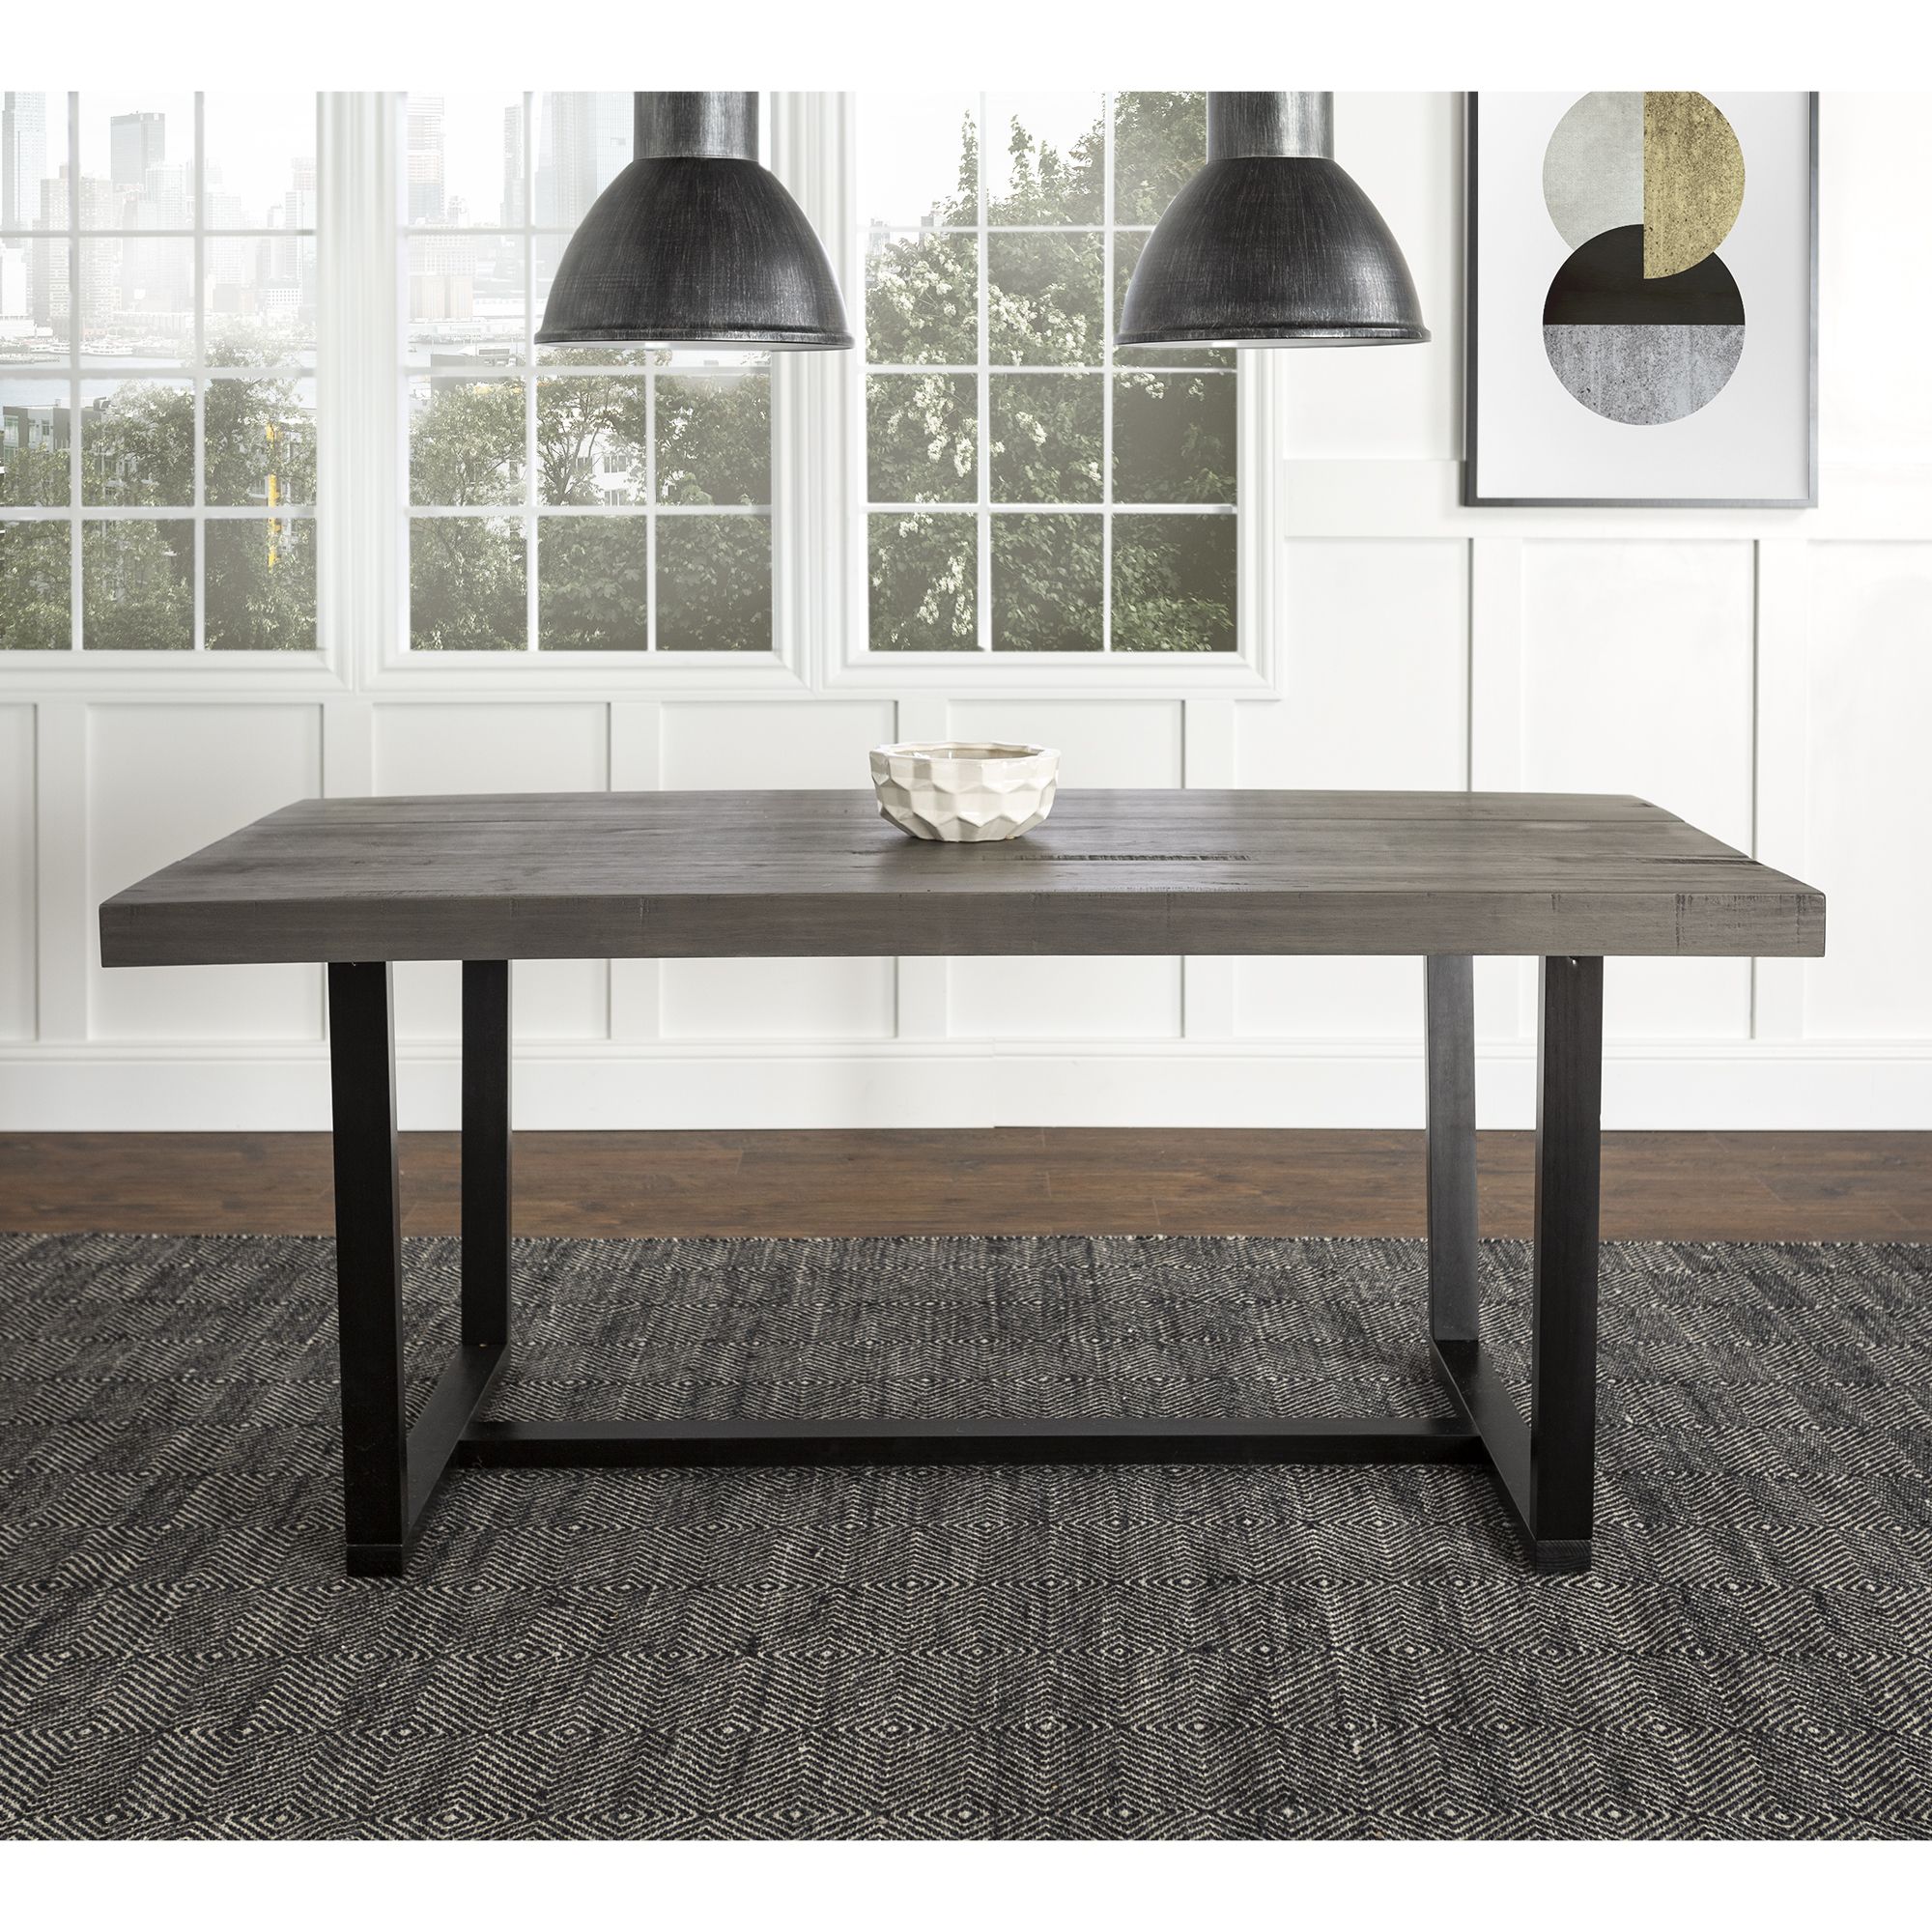 W. Trends Farmhouse 72&quot; Solid Wood Kitchen Dining Table - Gray